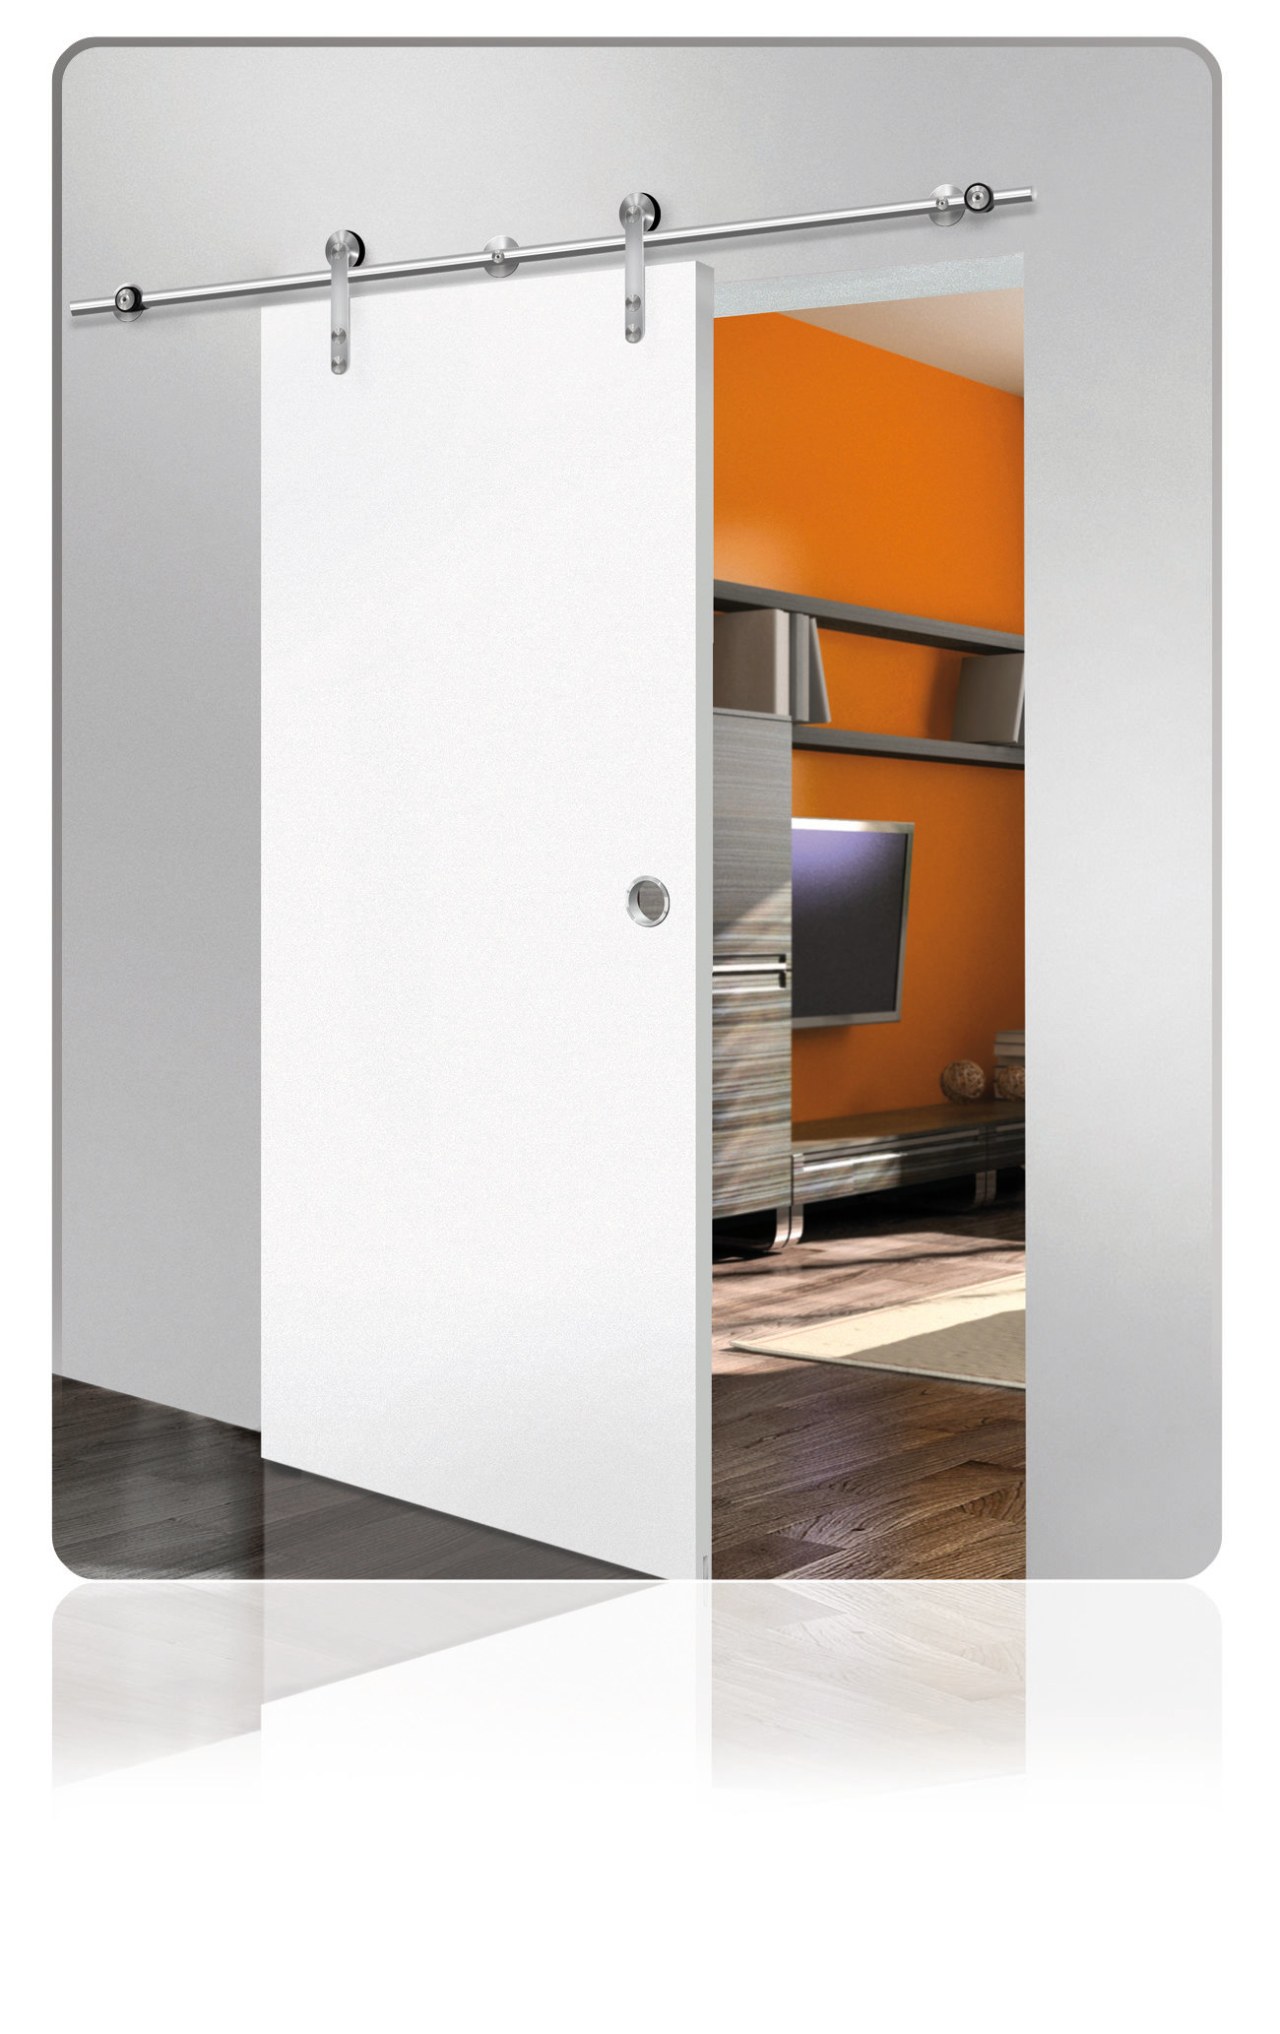 View of sliding doors from Amba Products. door, product, product design, sliding door, white